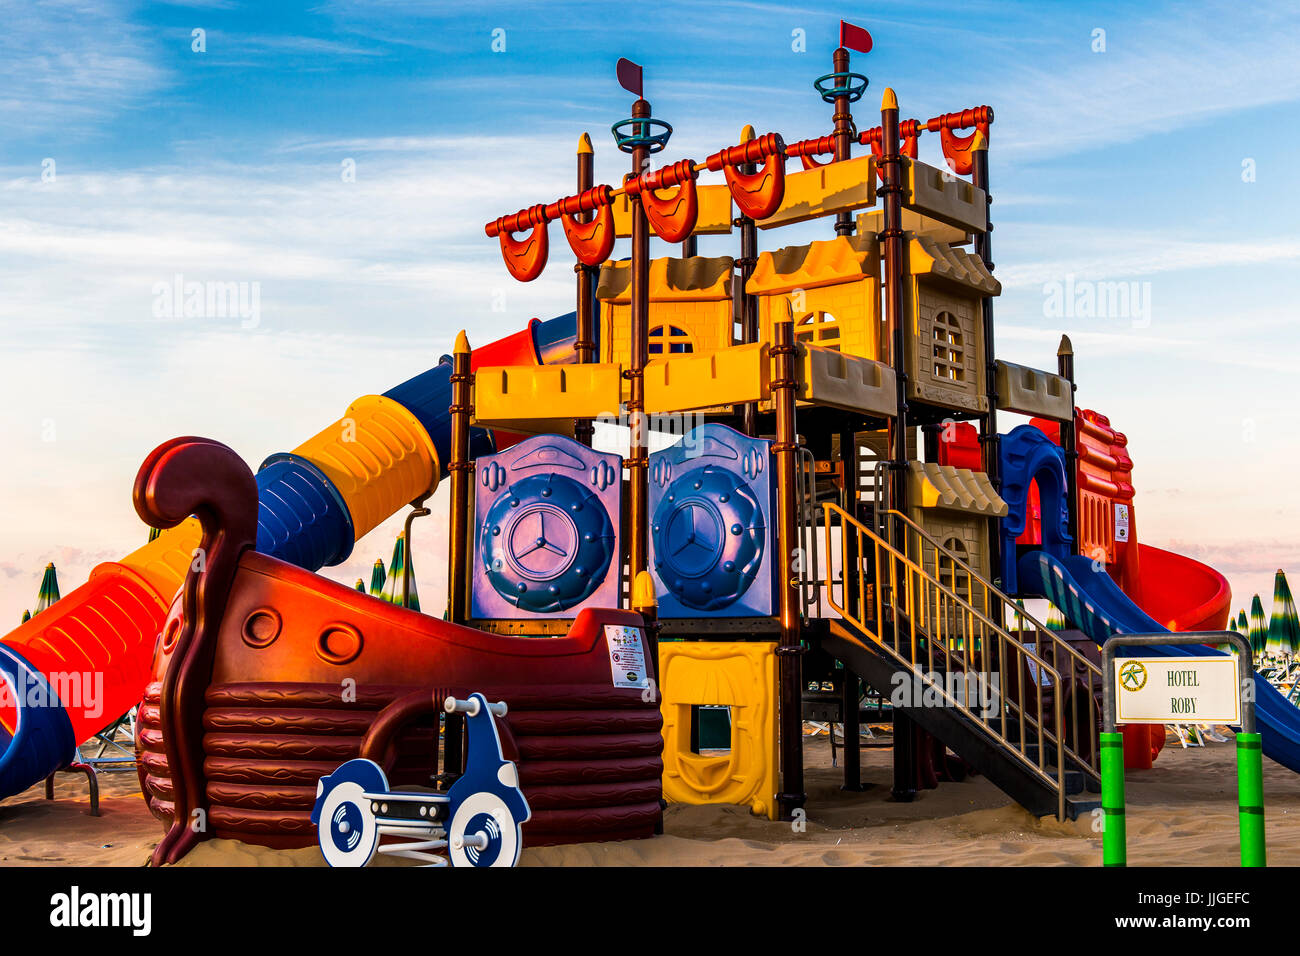 Big playground (ship) for children on the beach. Jesolo, Italy. Stock Photo